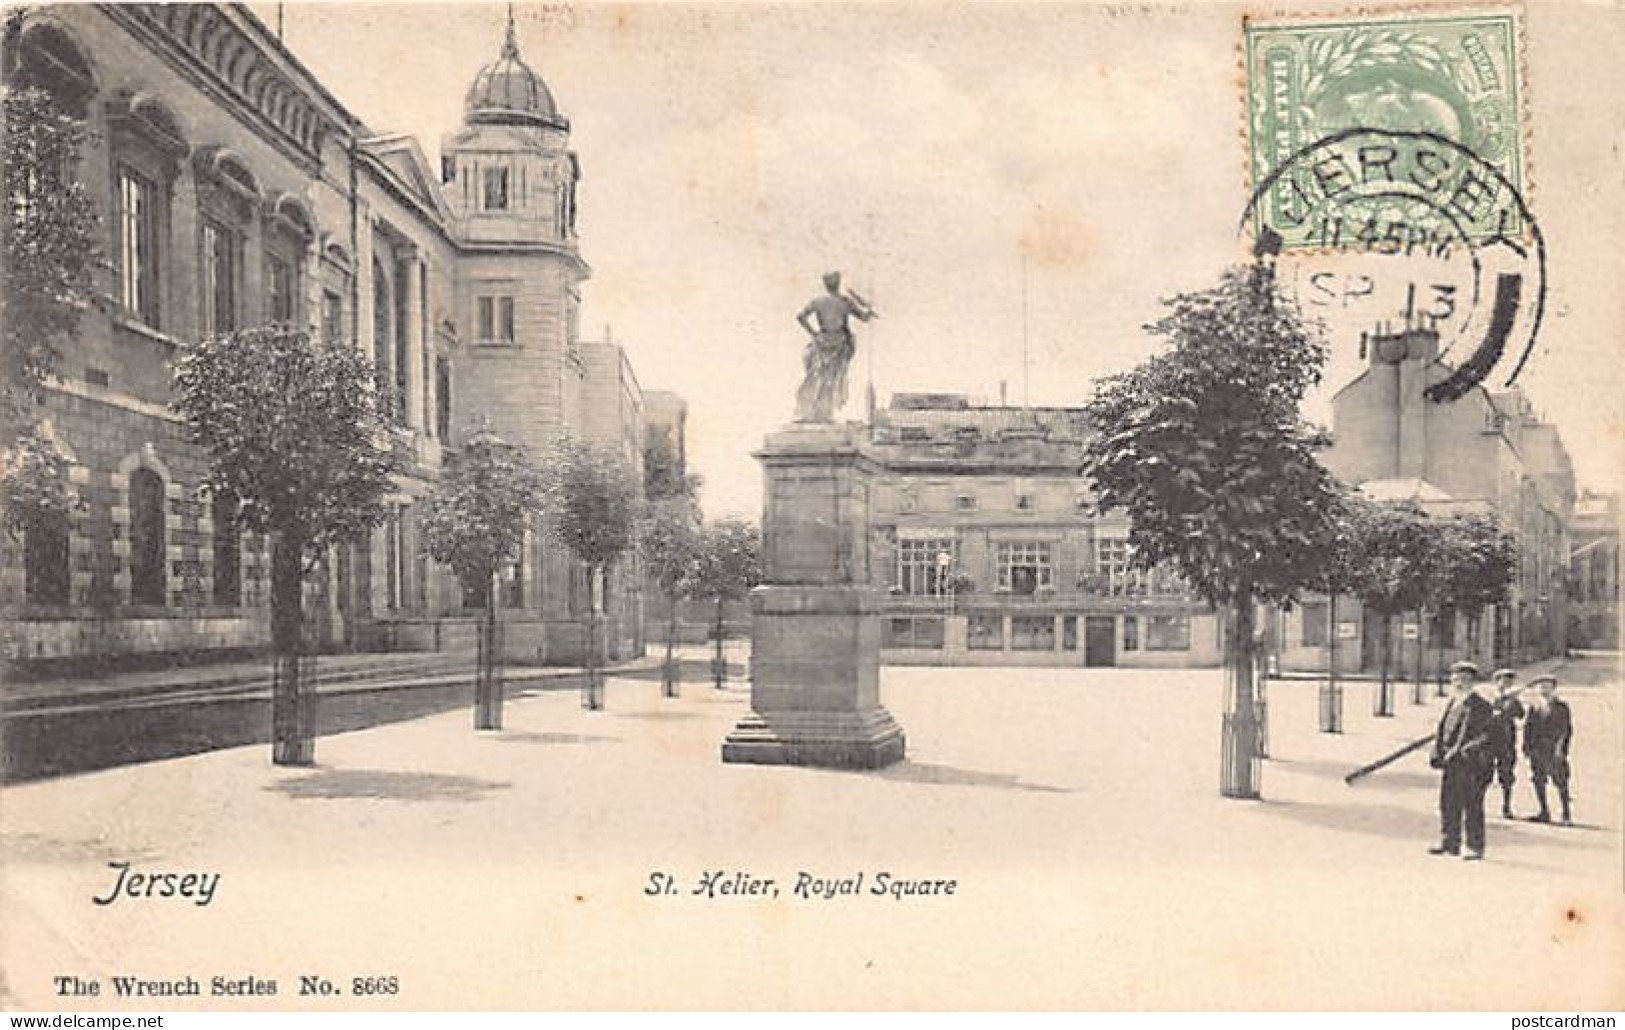 Jersey - SAINT-HELIER - Royal Square - Publ. The Wrench Series 8608  - St. Helier